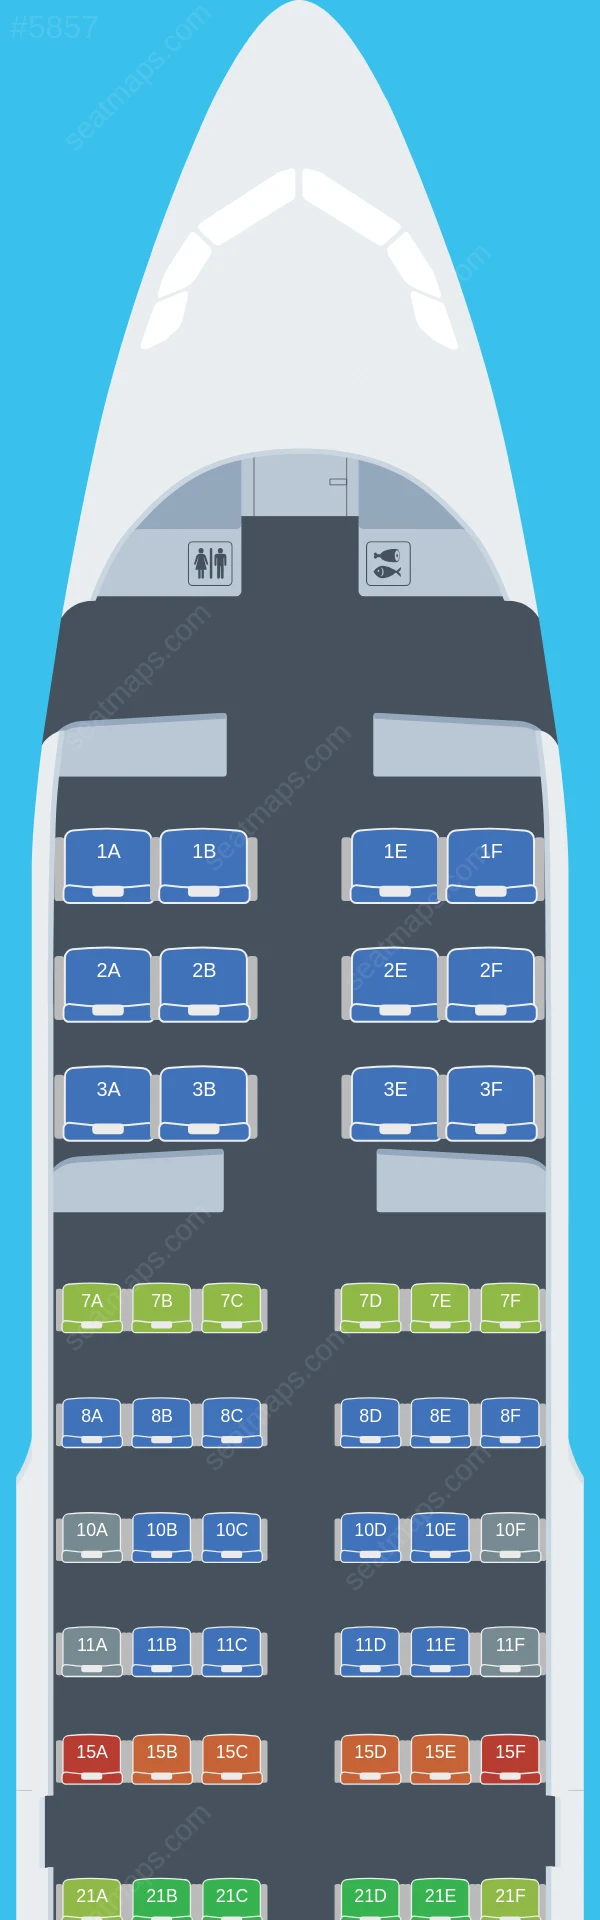 United Airbus A319-100 seatmap preview